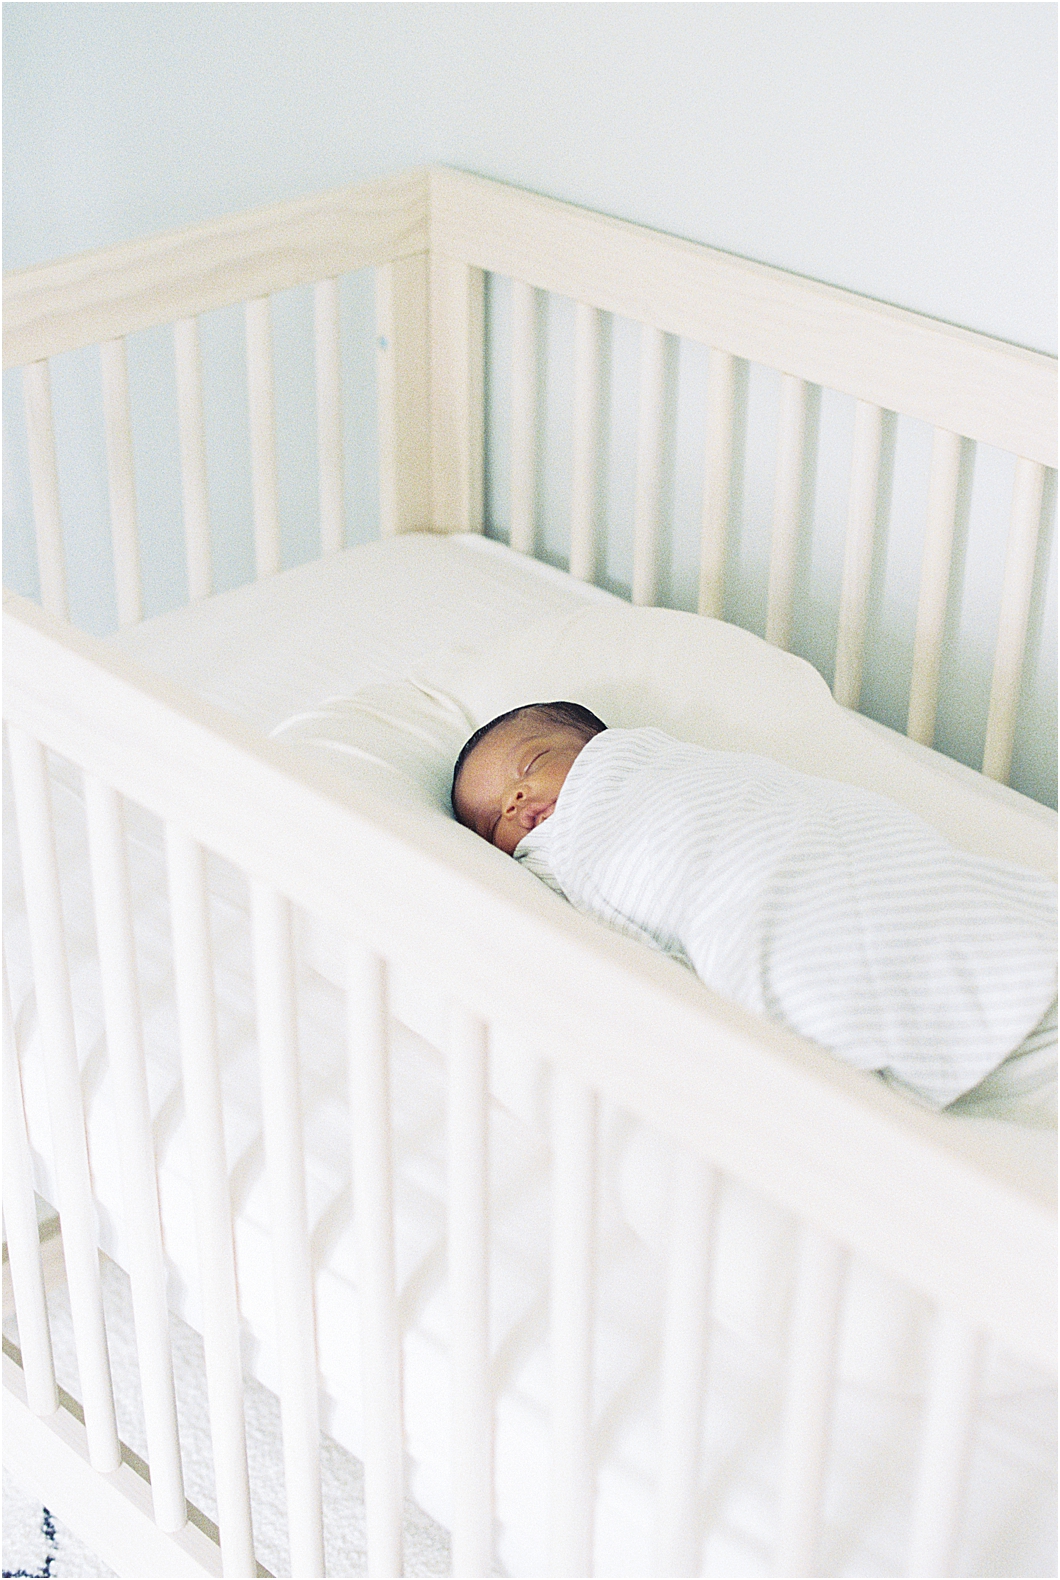 Neutral Nursery Inspiration, In-Home Newborn Photography in Charlotte, North Carolina | by Hillary Muelleck